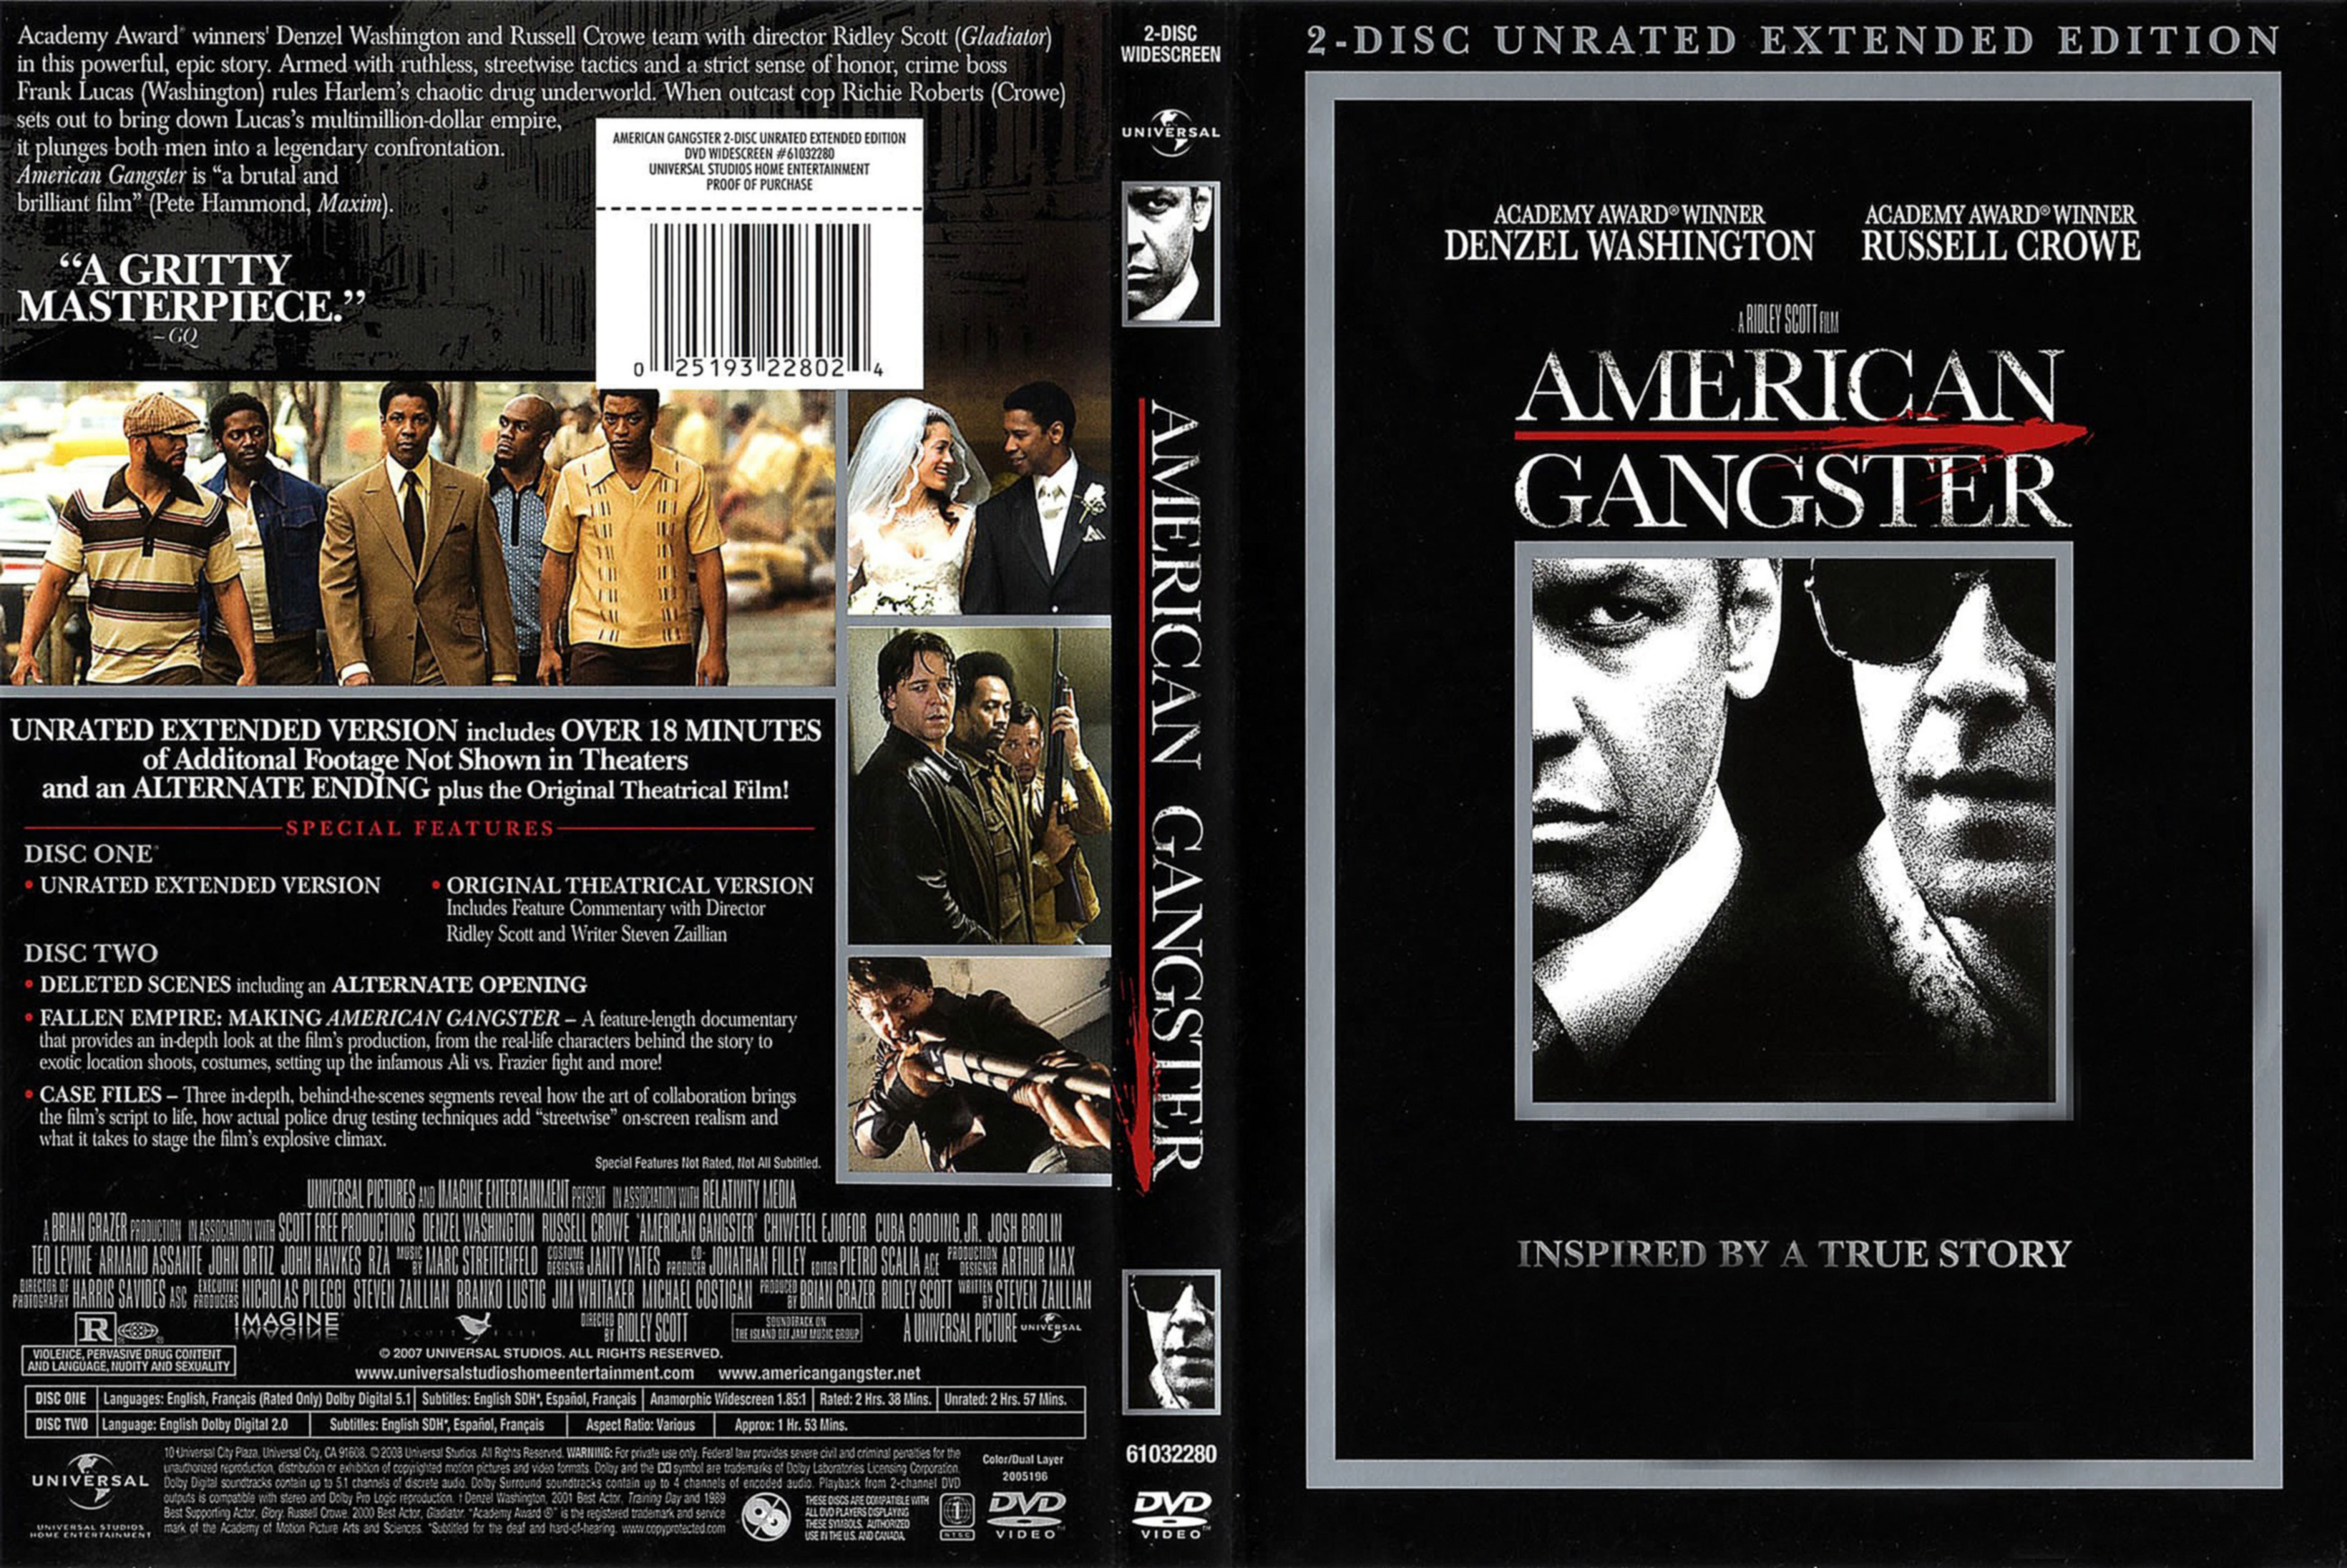 Jaquette DVD American Gangster Zone 1